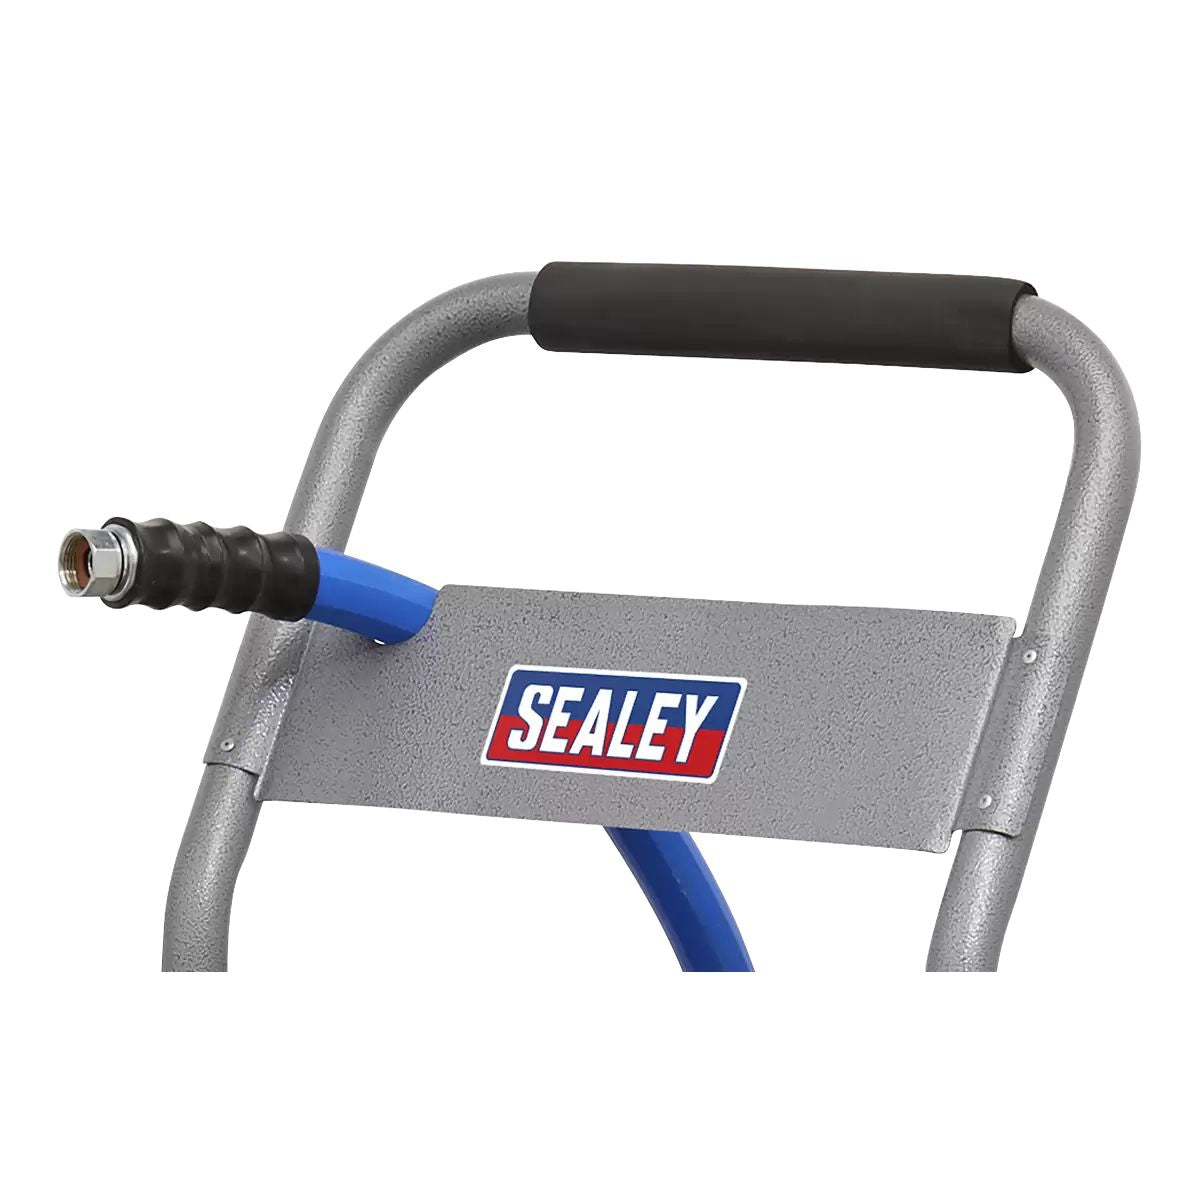 Sealey HRKIT15 Heavy-Duty Hose Reel Cart with 15m Hot & Cold Rubber Water Hose